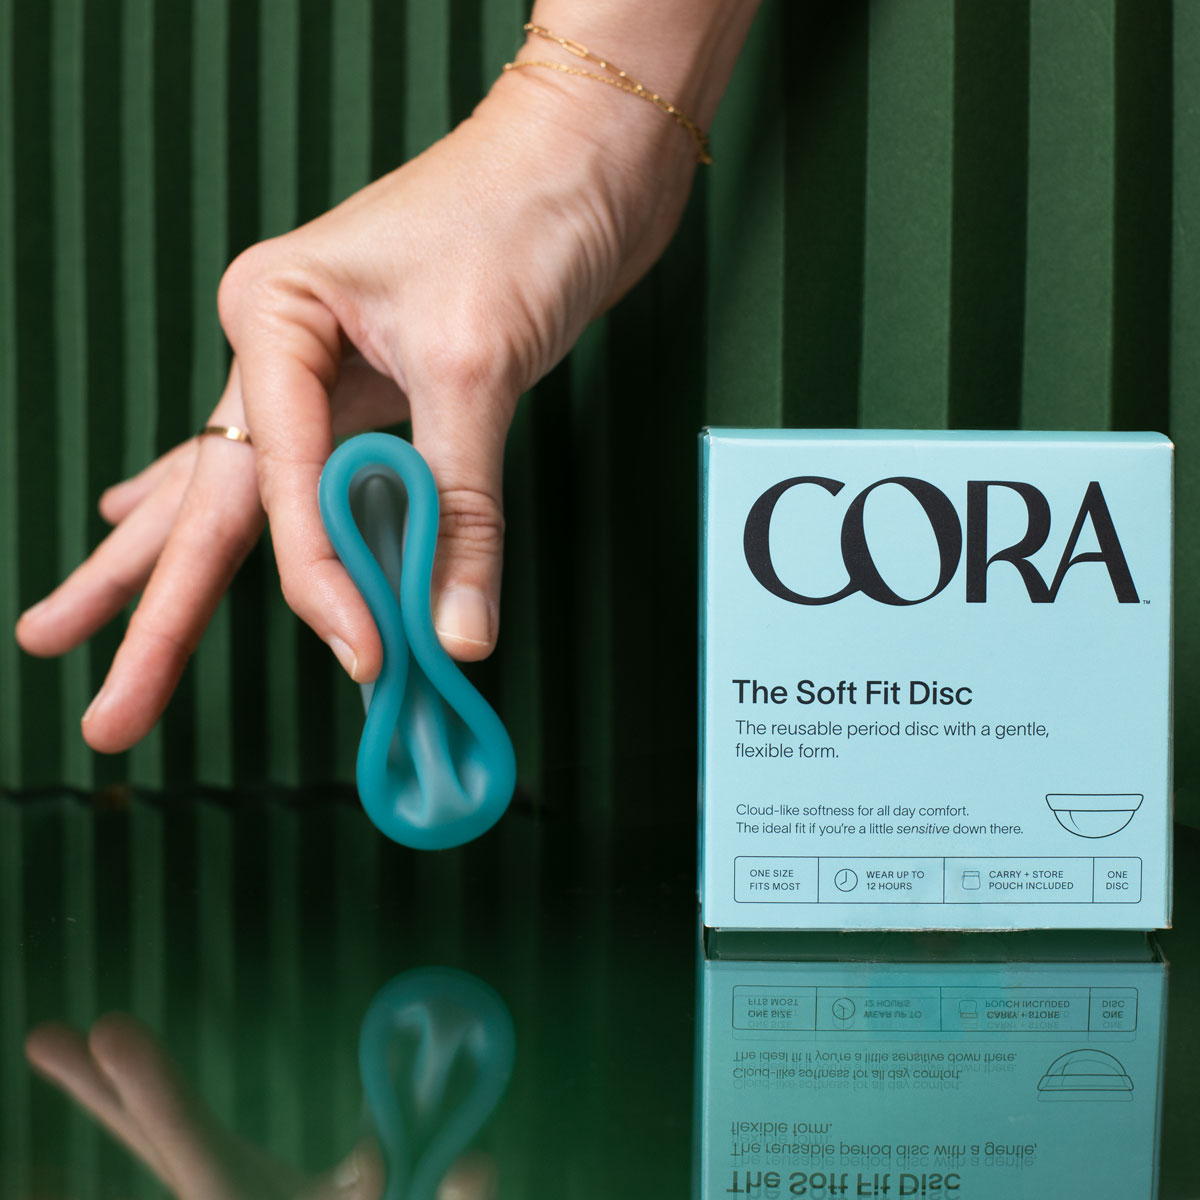 cora soft fit disc blue folded by white hand next to blue box package